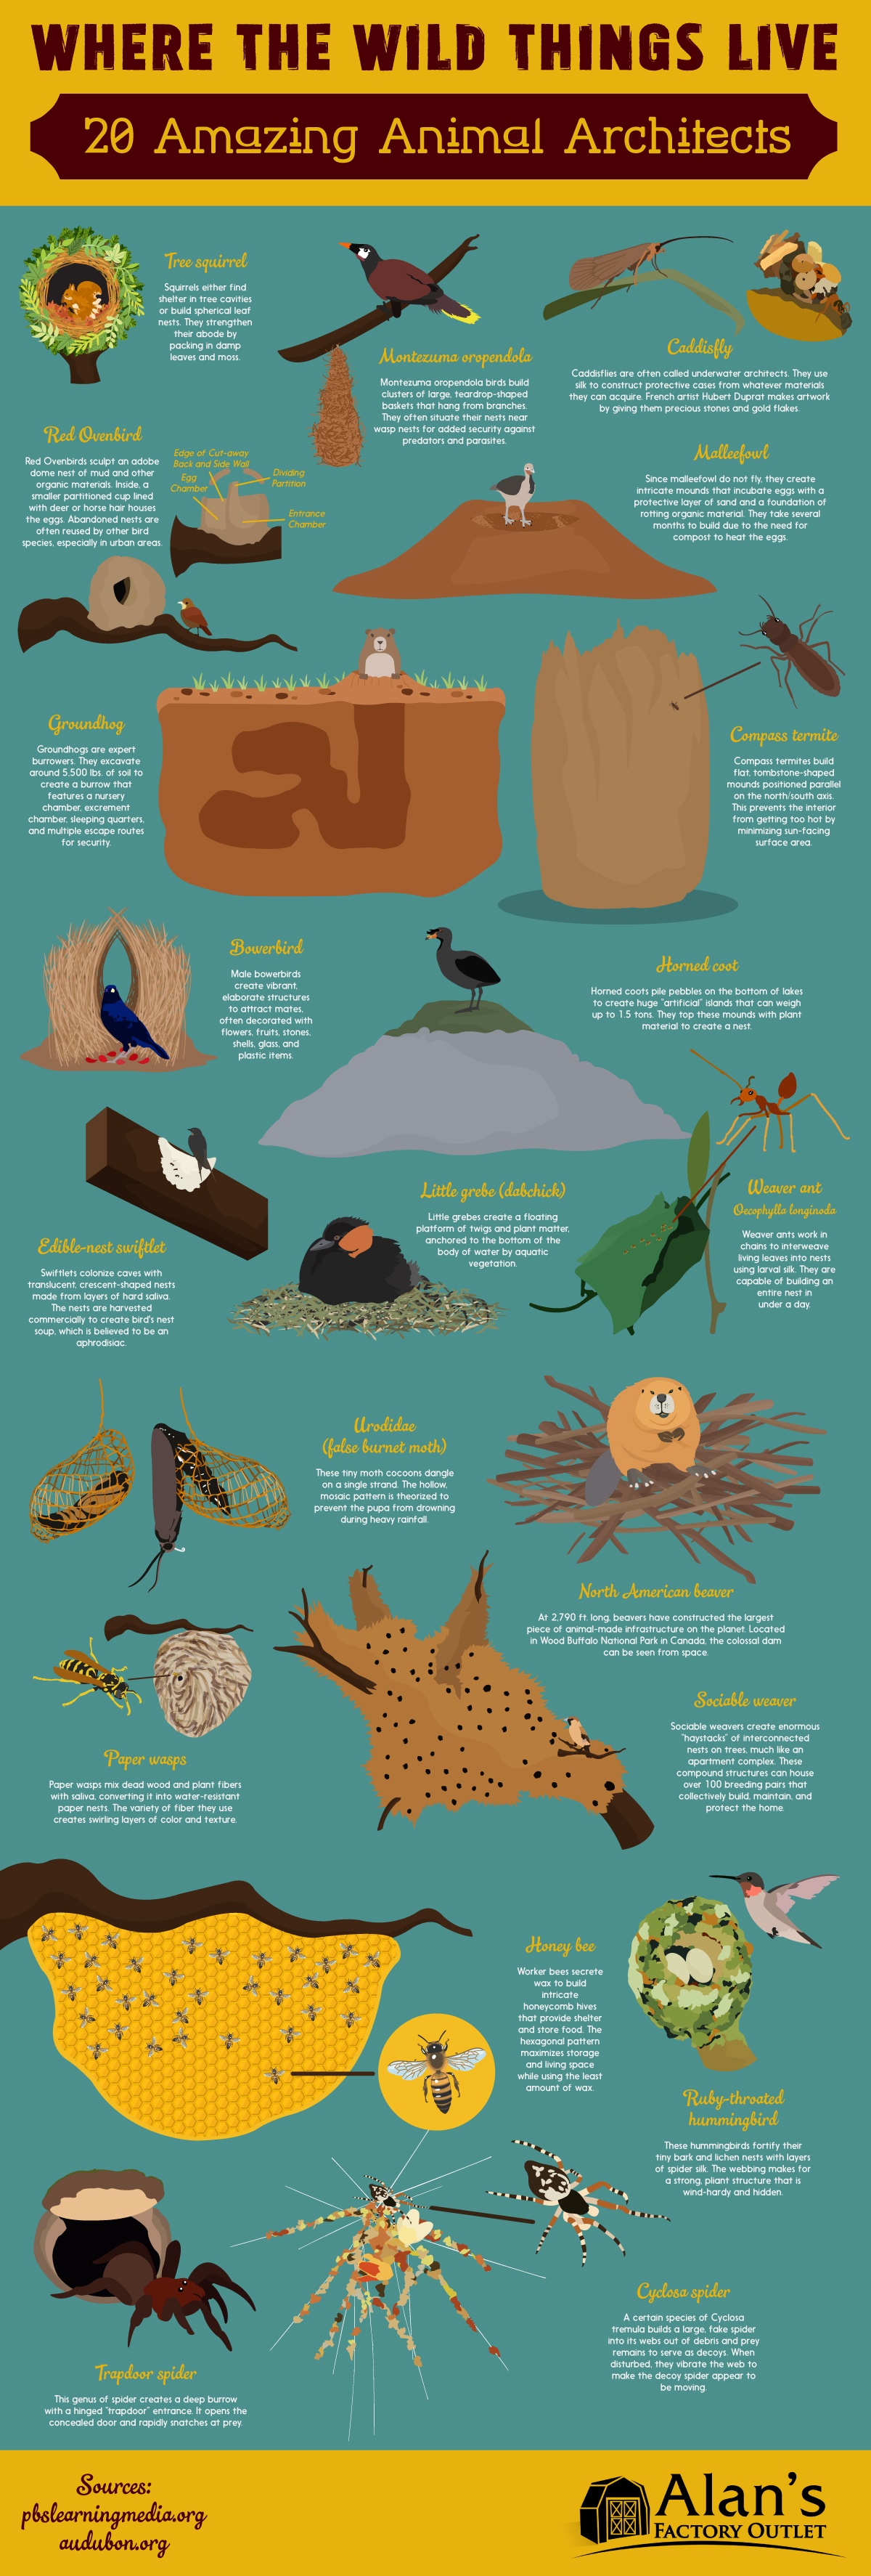 Where the Wild Things Live: 20 Amazing Animal Architects [Infographic]